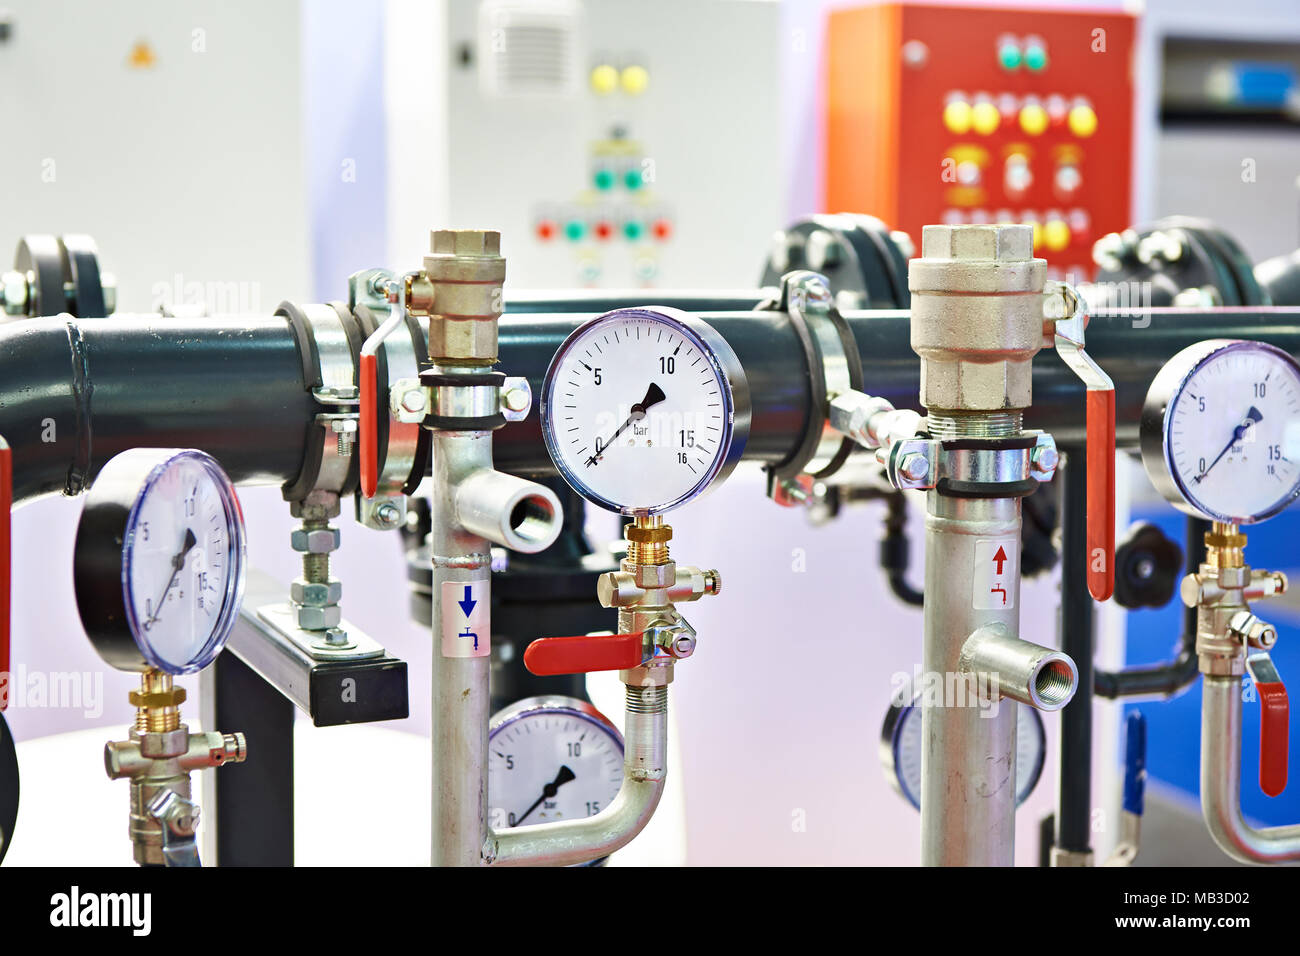 Industrial equipment with pipes and manometers Stock Photo